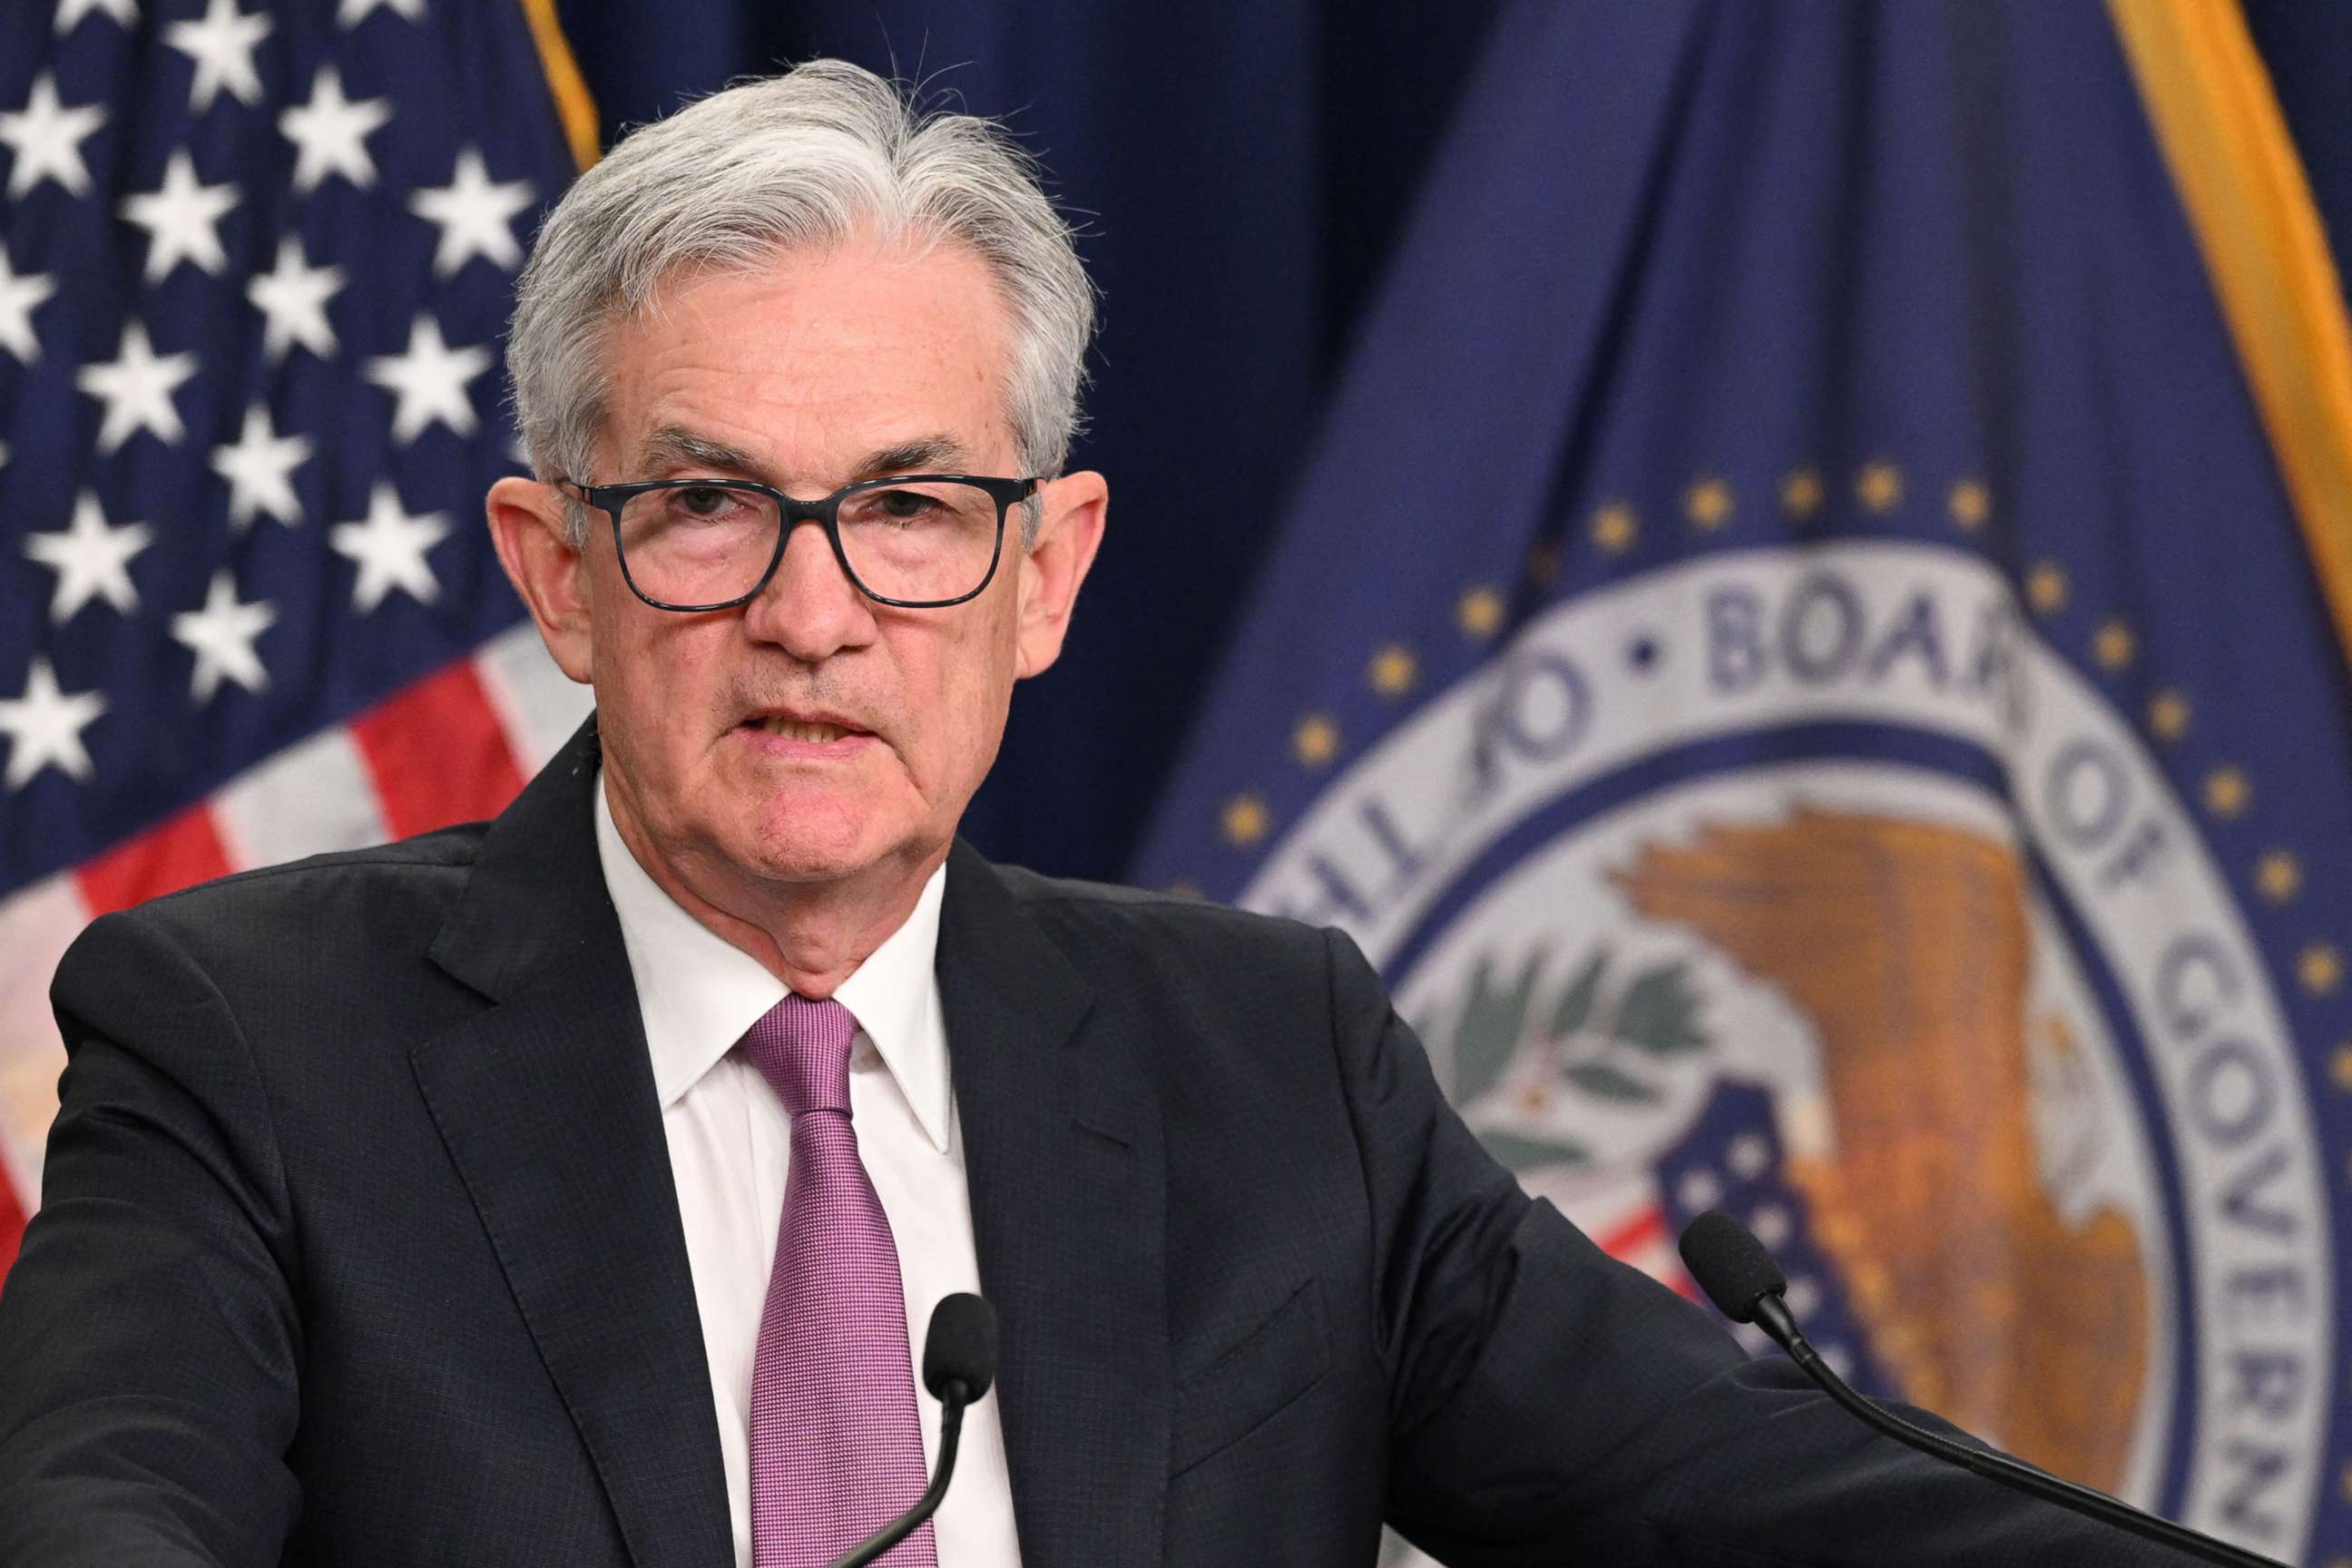 PHOTO: In this file photo taken on July 27, 2022 Federal Reserve Board Chairman Jerome Powell speaks during a news conference in Washington, D.C.